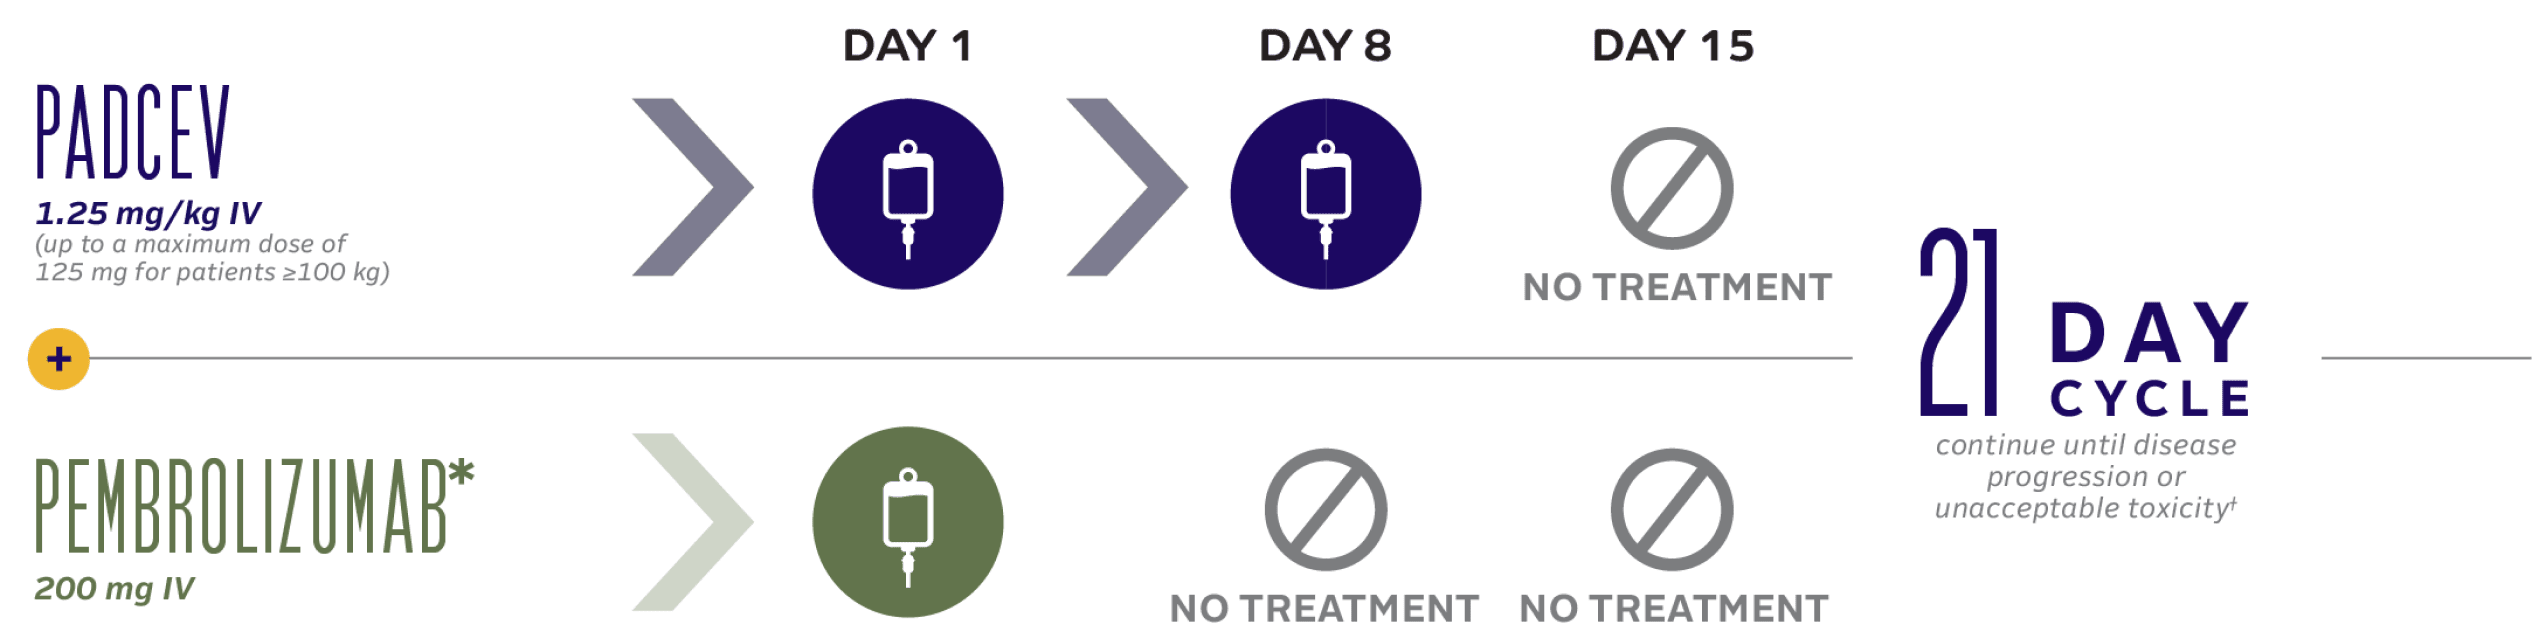 21-day dosing cycle for PADCEV in combination with pembrolizumab.